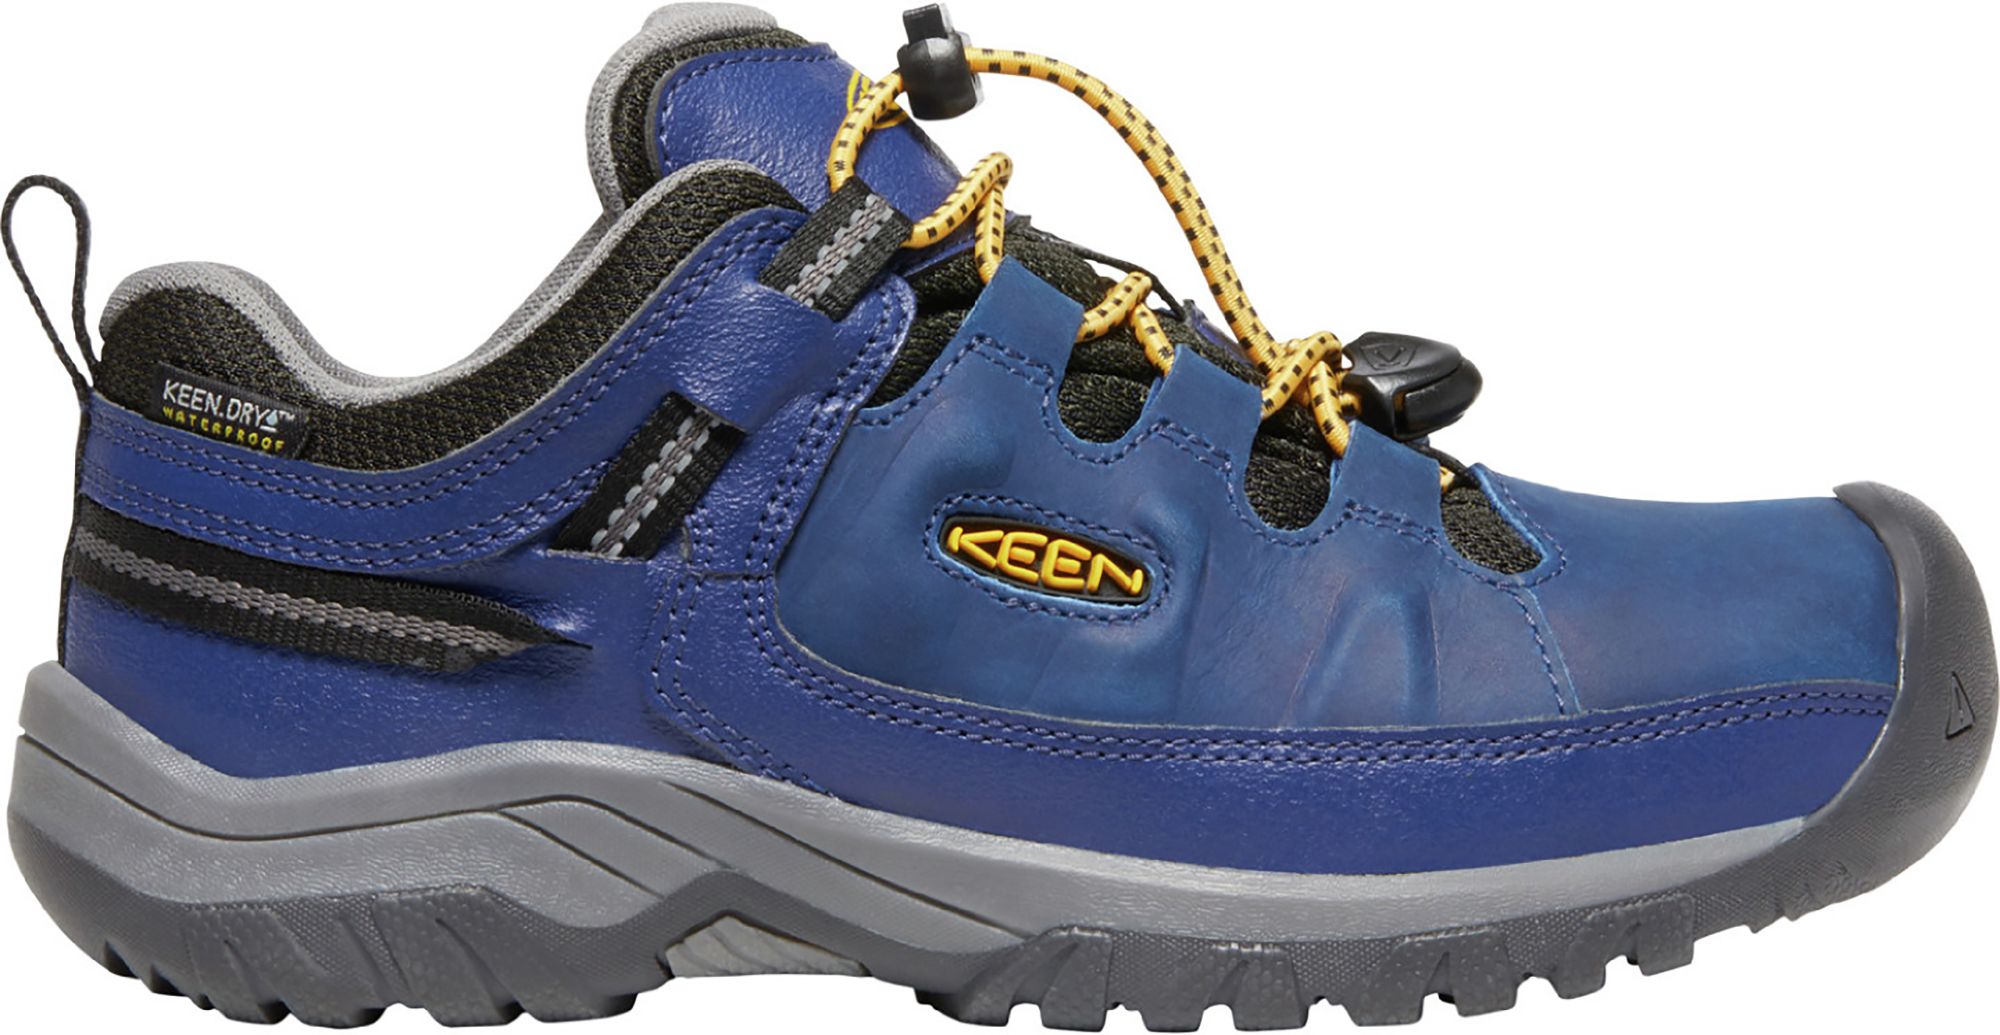 keen shoes on sale near me